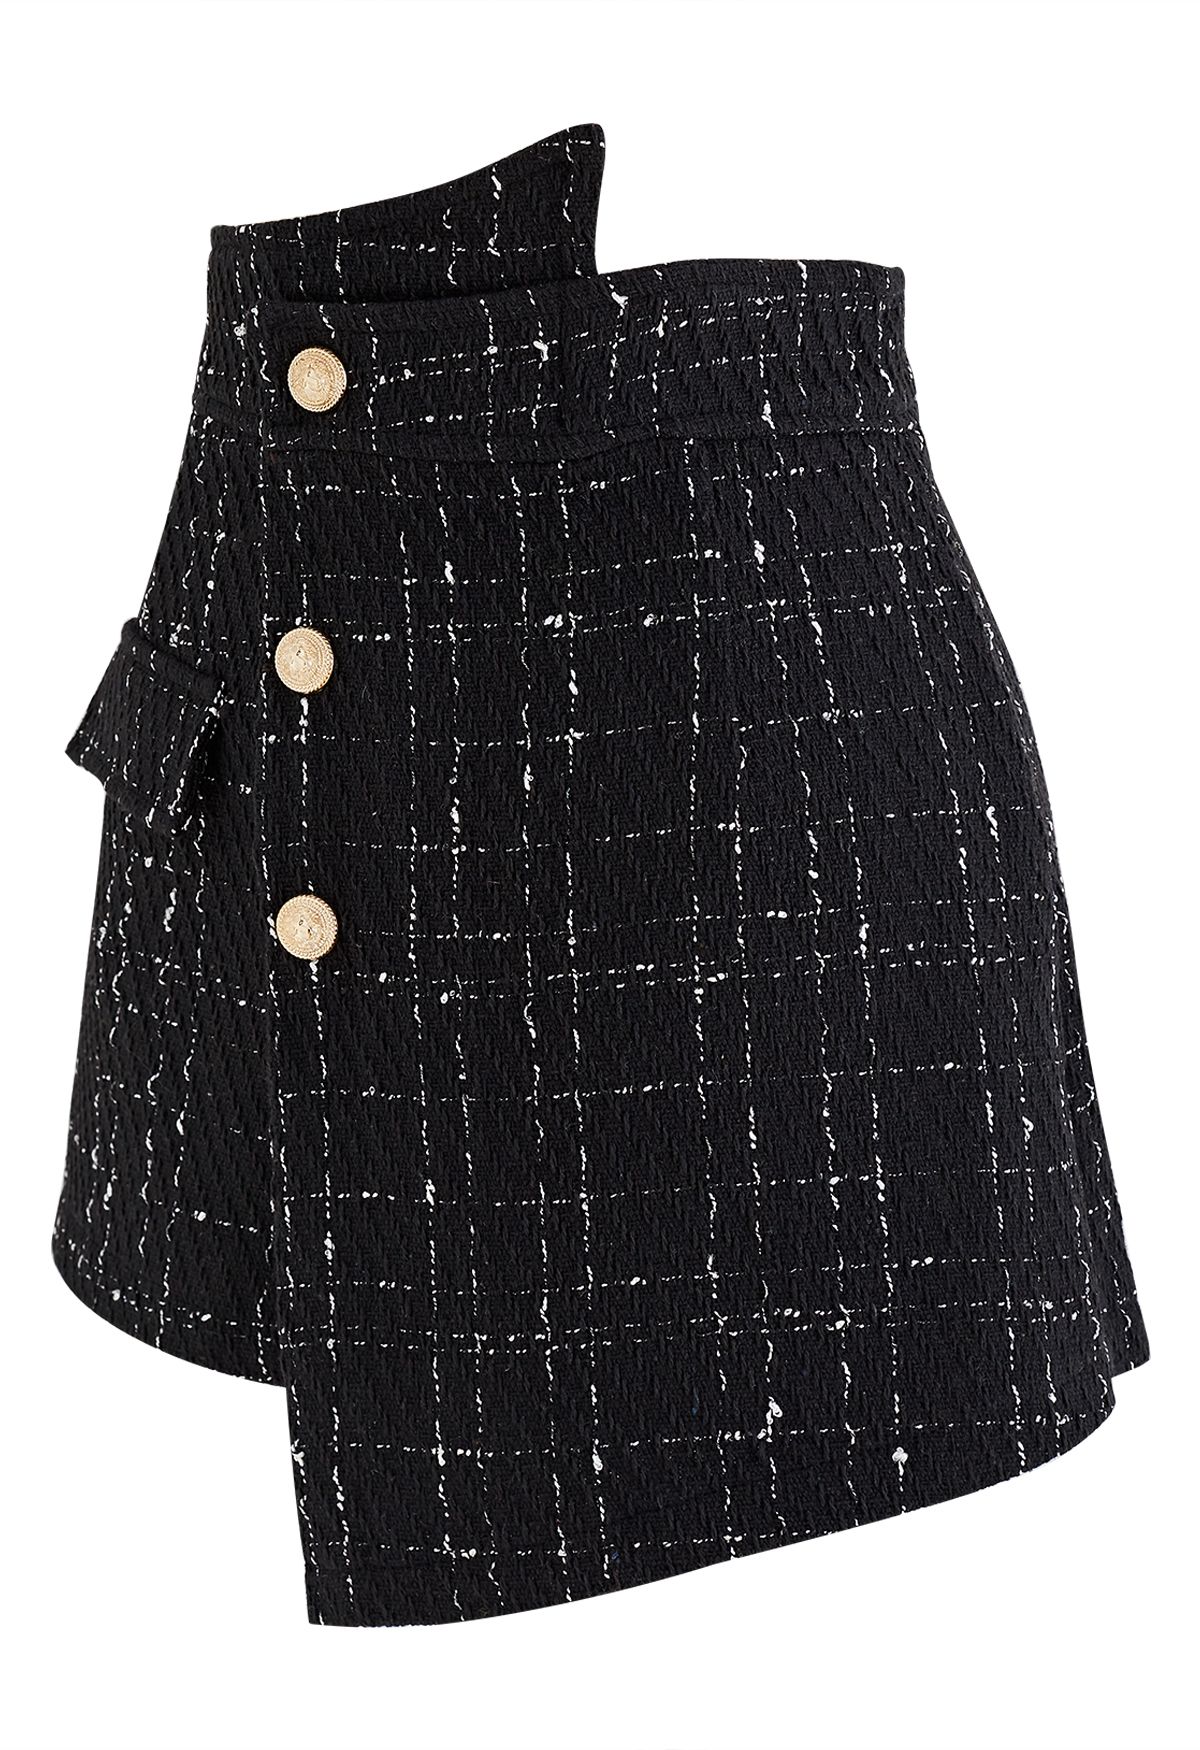 Grid Tweed Buttoned Flap Skorts in Black - Retro, Indie and Unique Fashion